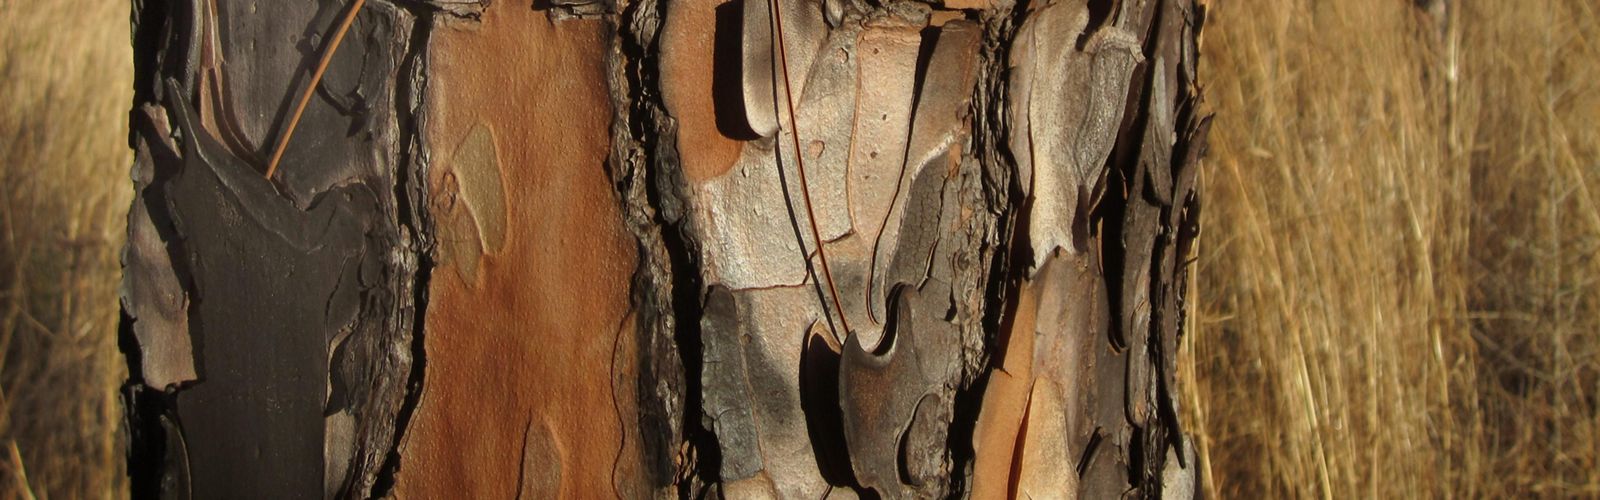 A tree trunk reveals bark of different shades.